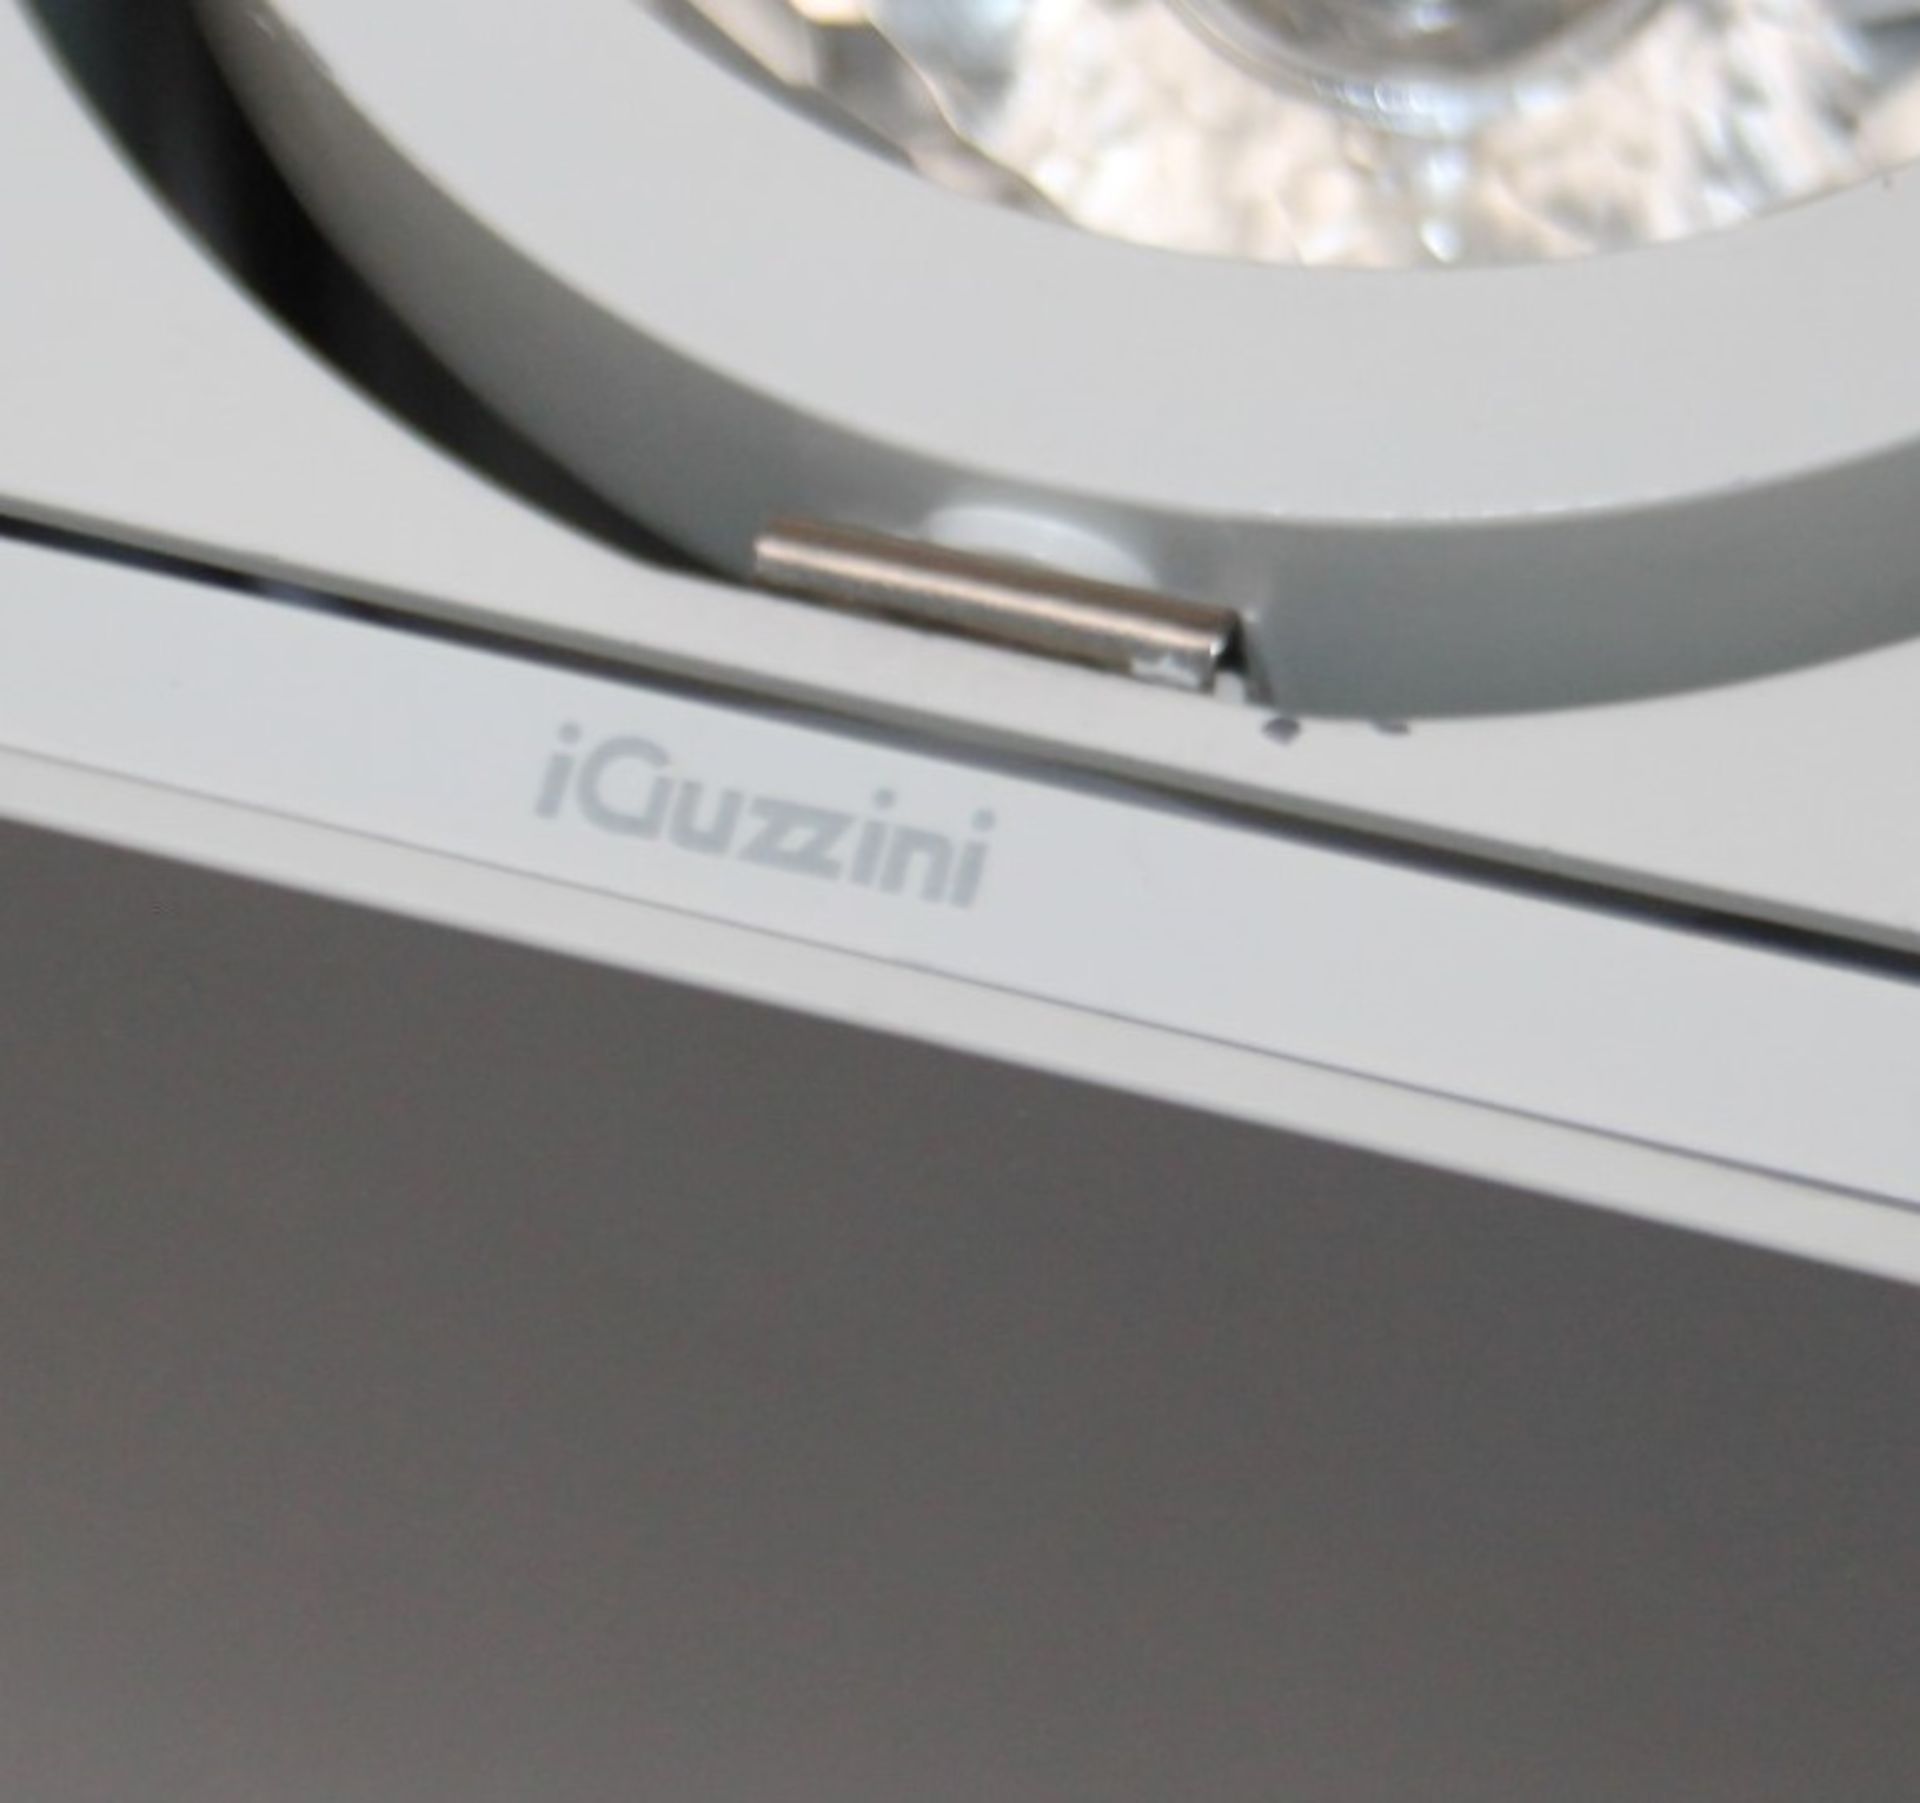 4 x IGUZZINI Commercial Twin Directional Gimble Spot Light Fittings In Metal Casings (5326) - Image 3 of 7